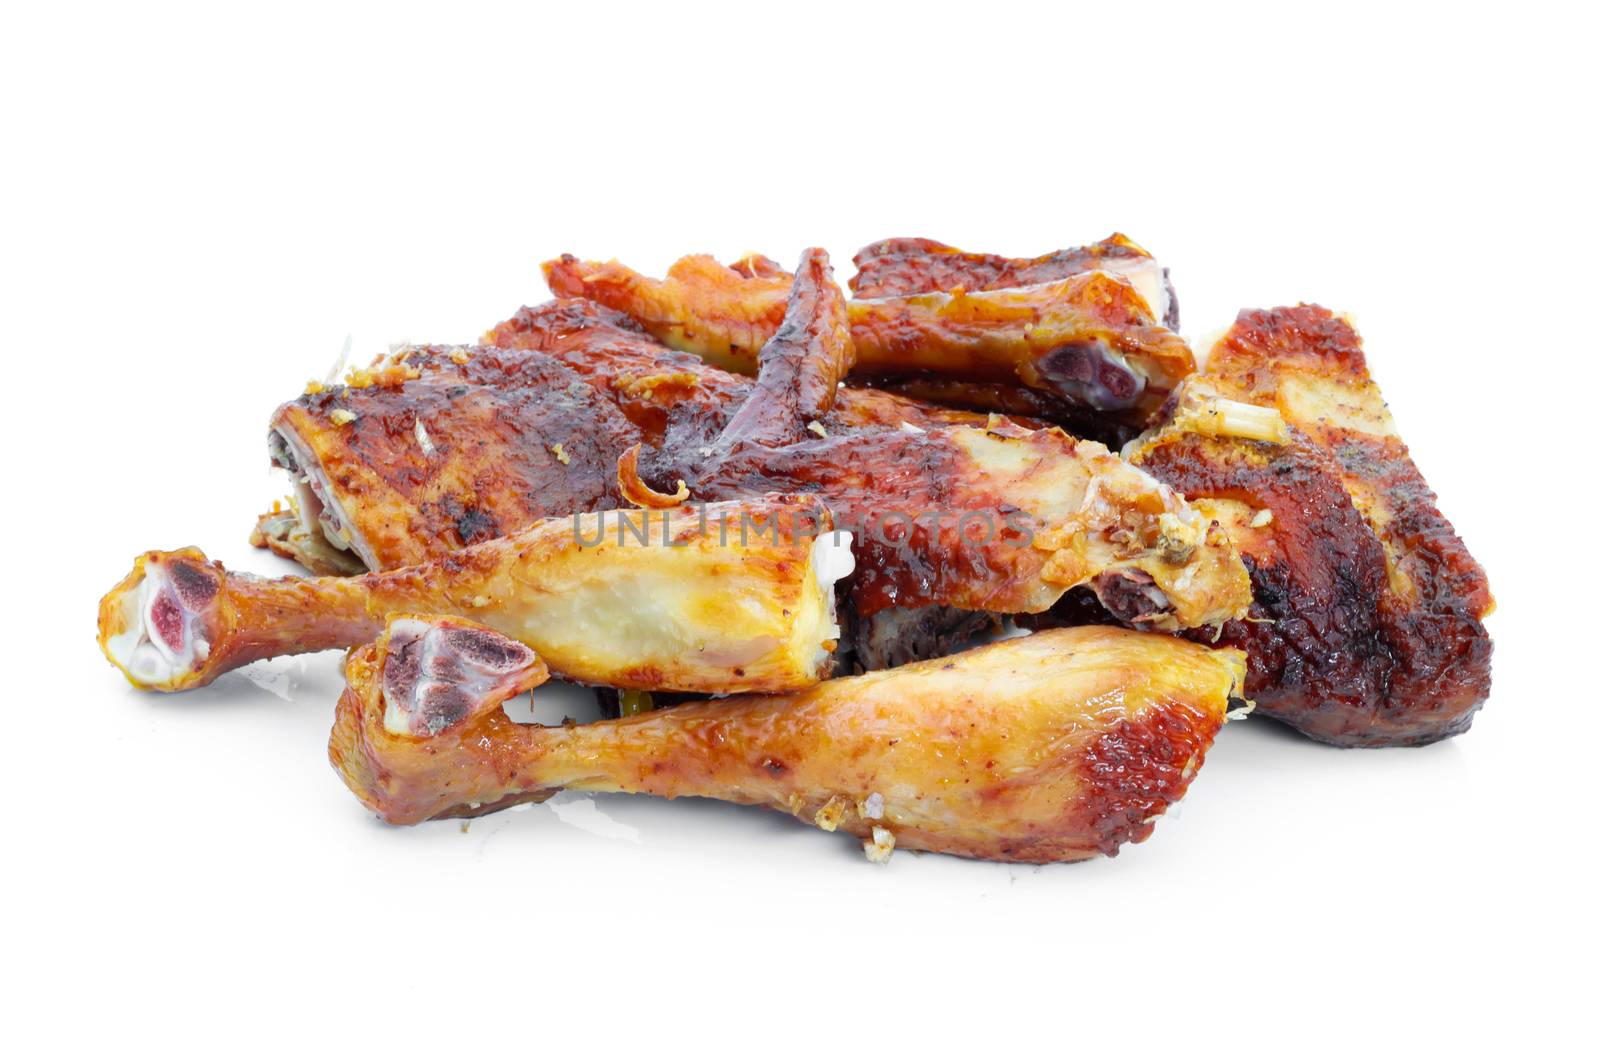 Grilled chicken food on a white background